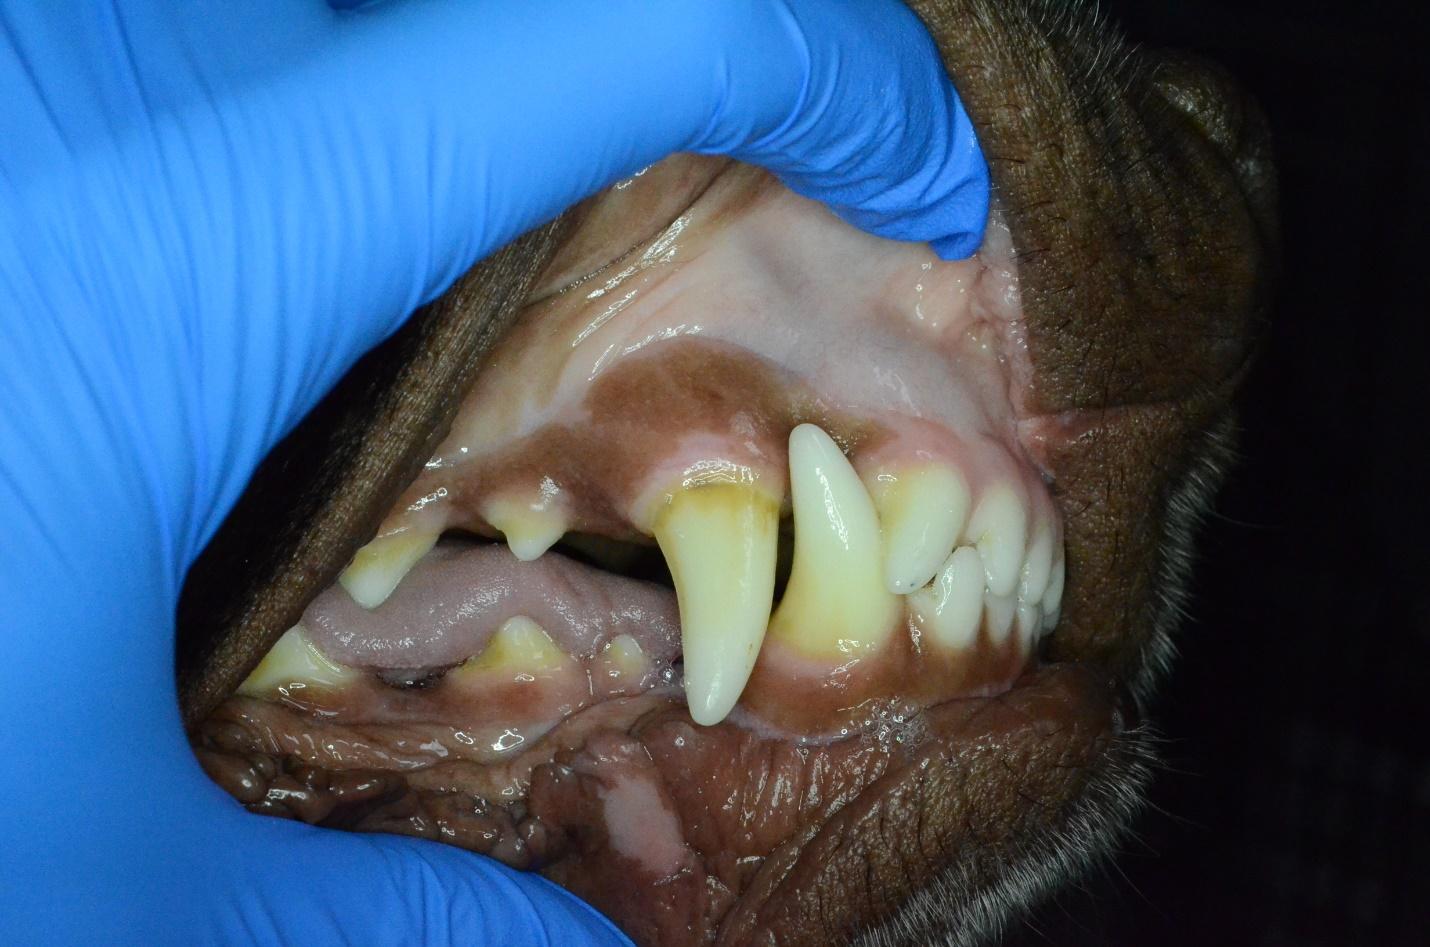 Interdigitation of the lateral or 3rd incisors, mandibular canine, and maxillary canine from the side view.